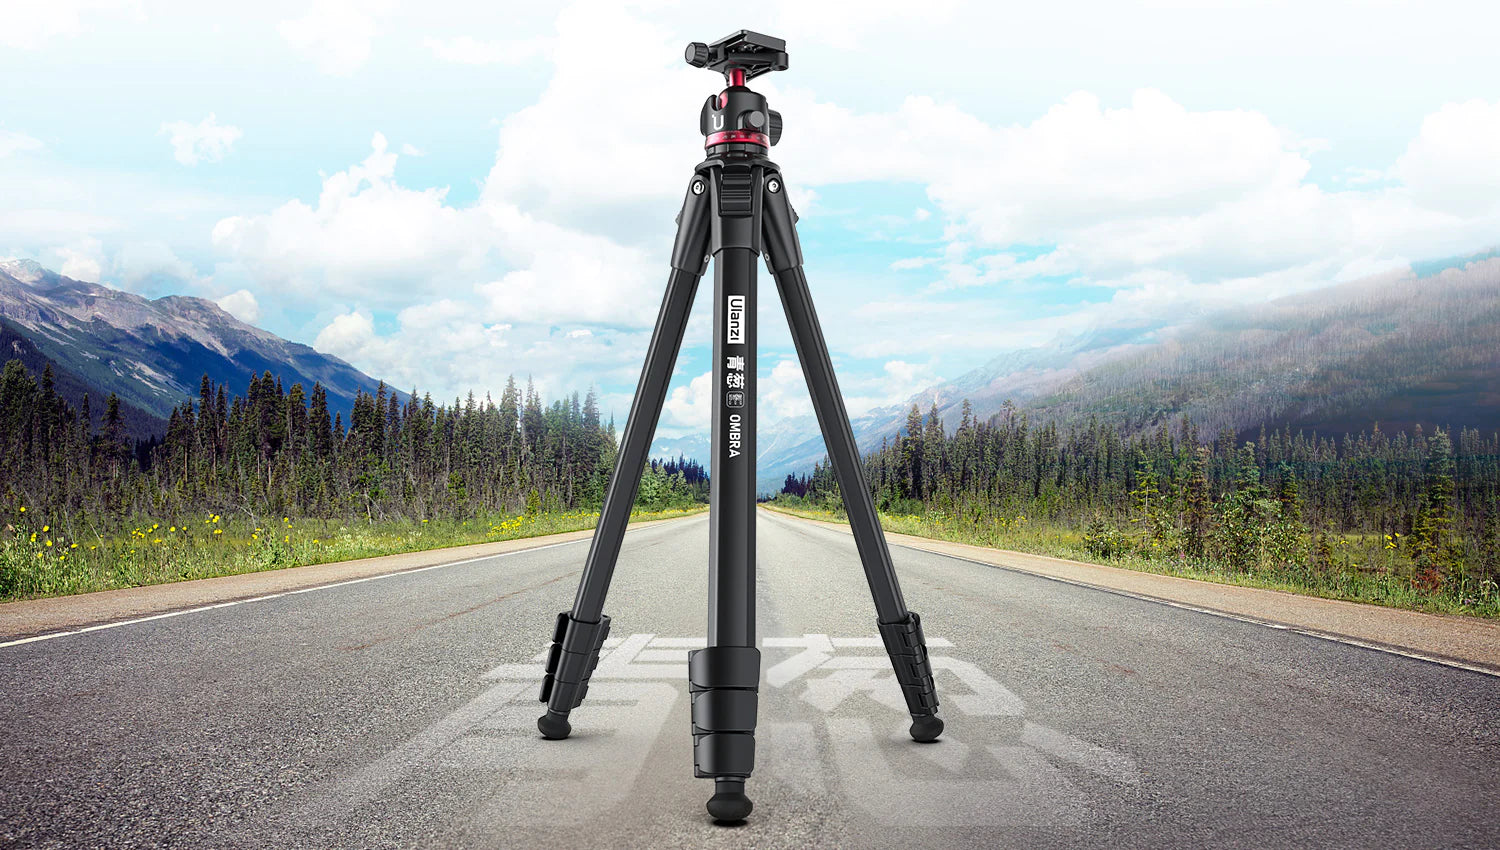 Aluminum tripods are heavier than their carbon fiber cousins, offering a sense of solidity and sturdiness.